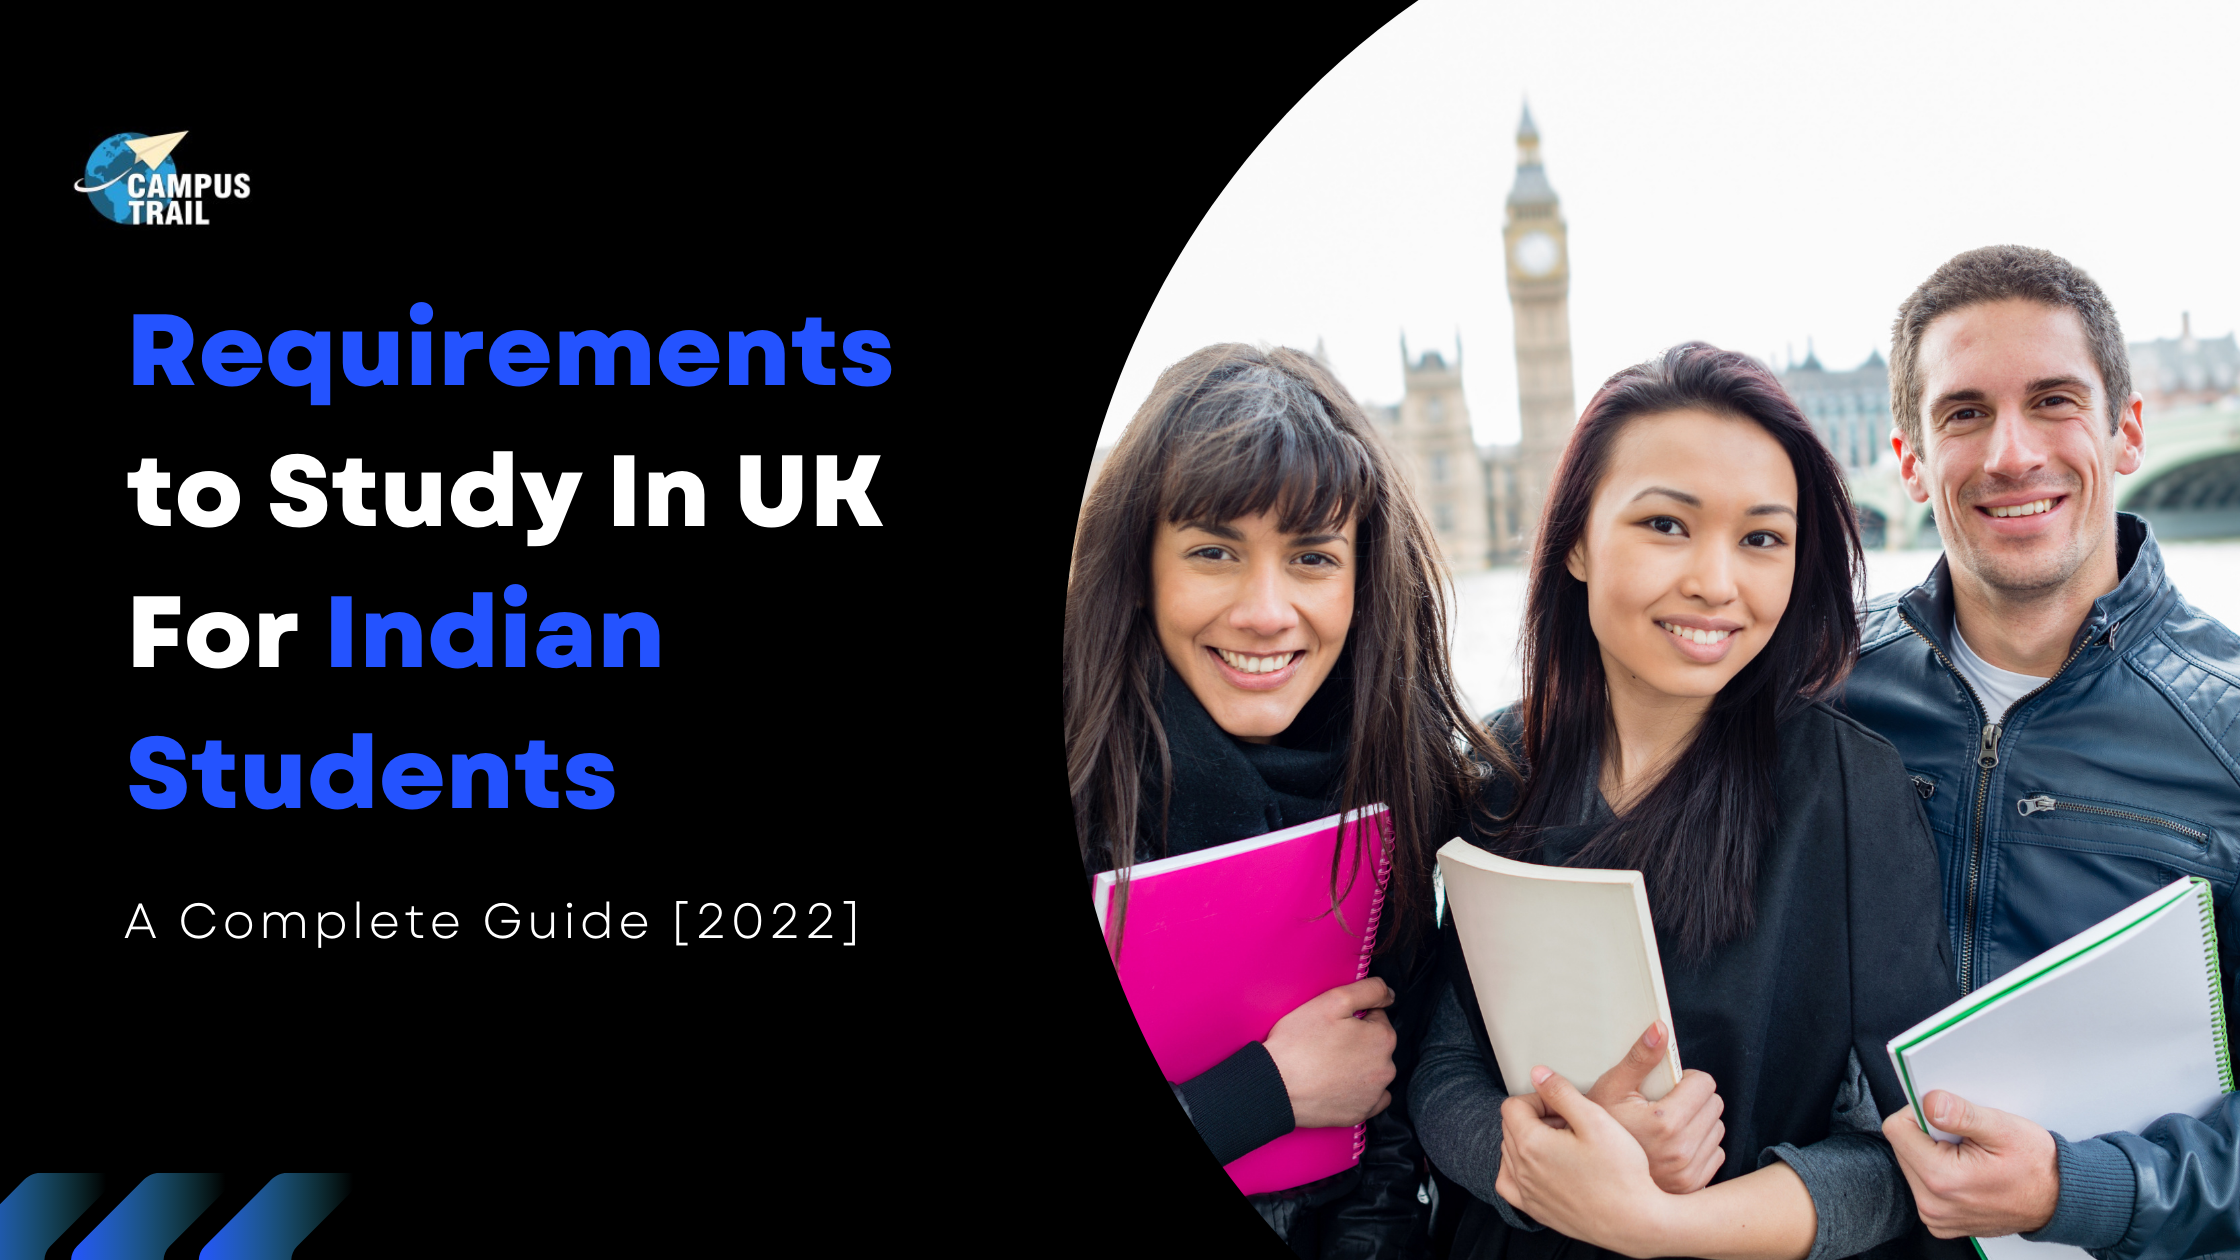 Requirements to Study In UK For Indian Students: A Complete Guide [2022]